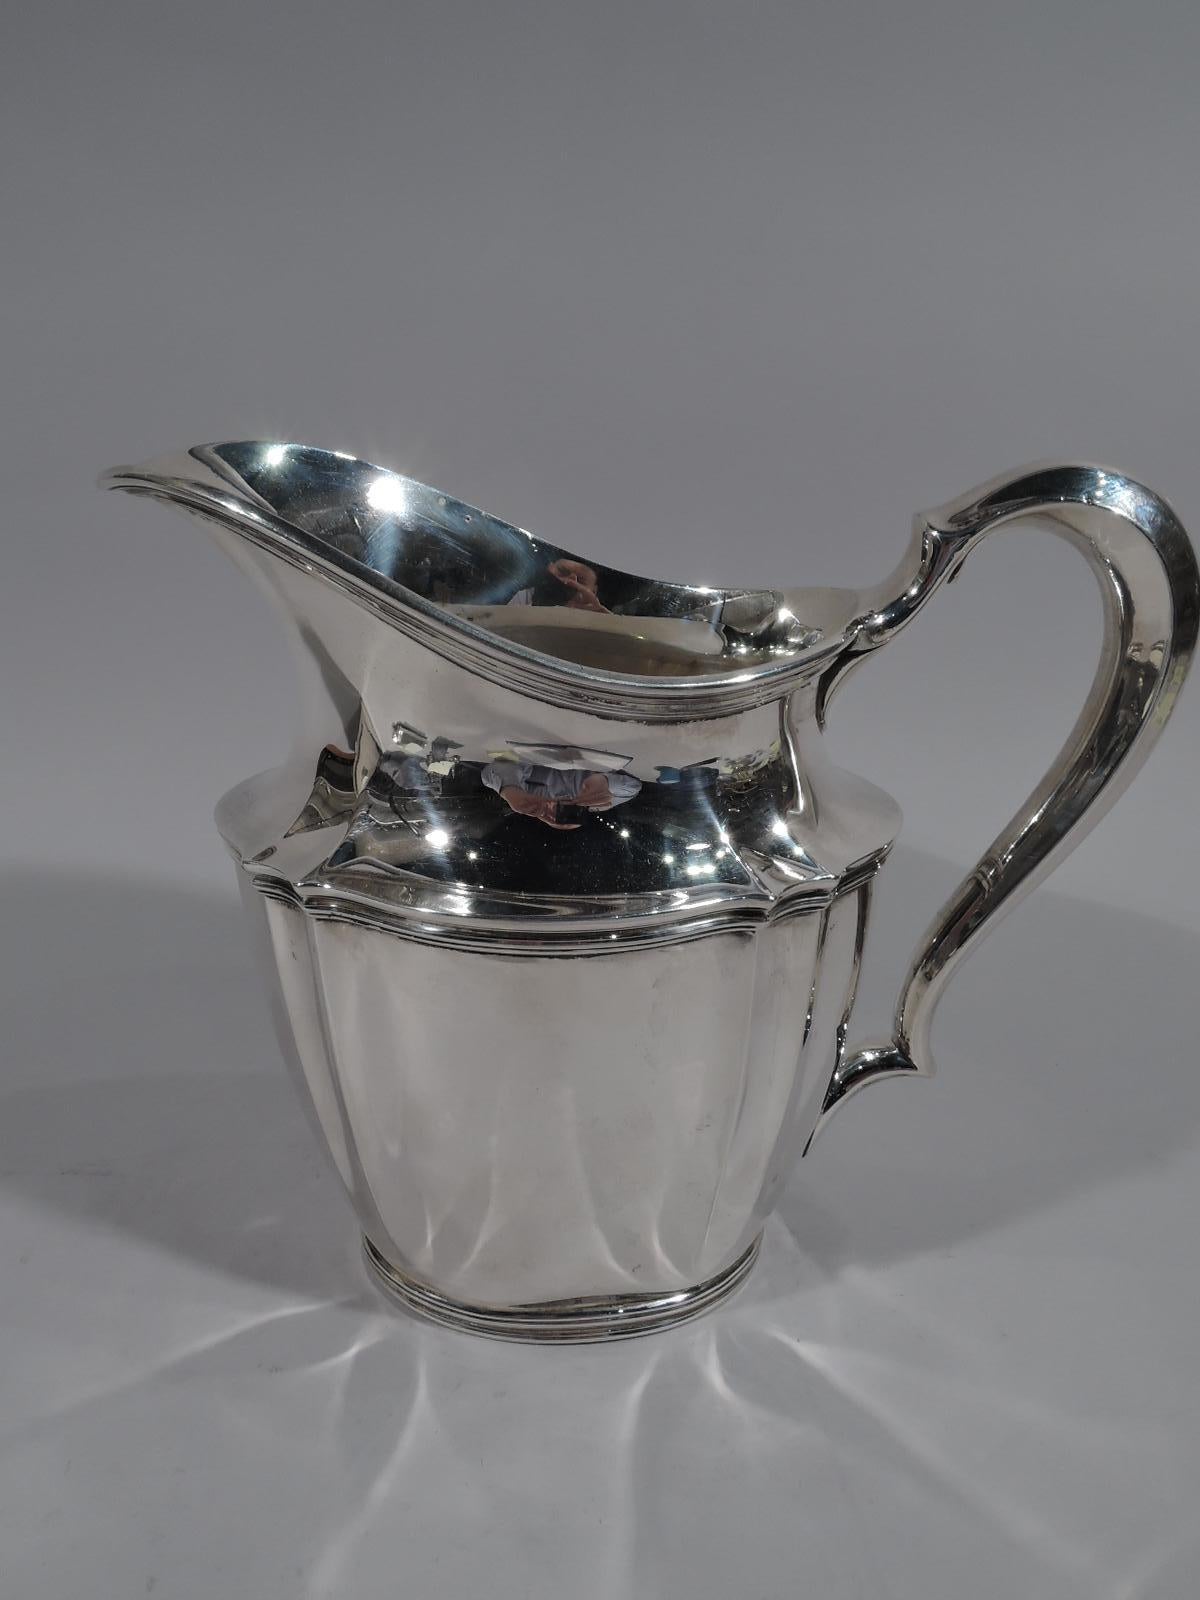 Traditional sterling silver water pitcher. Made by Tiffany & Co. in New York, circa 1910. Tapering oval body, helmet mouth, and high-looping handle. Restrained fluting and reeding. Fully marked including pattern no. 14997D and director’s letter m.